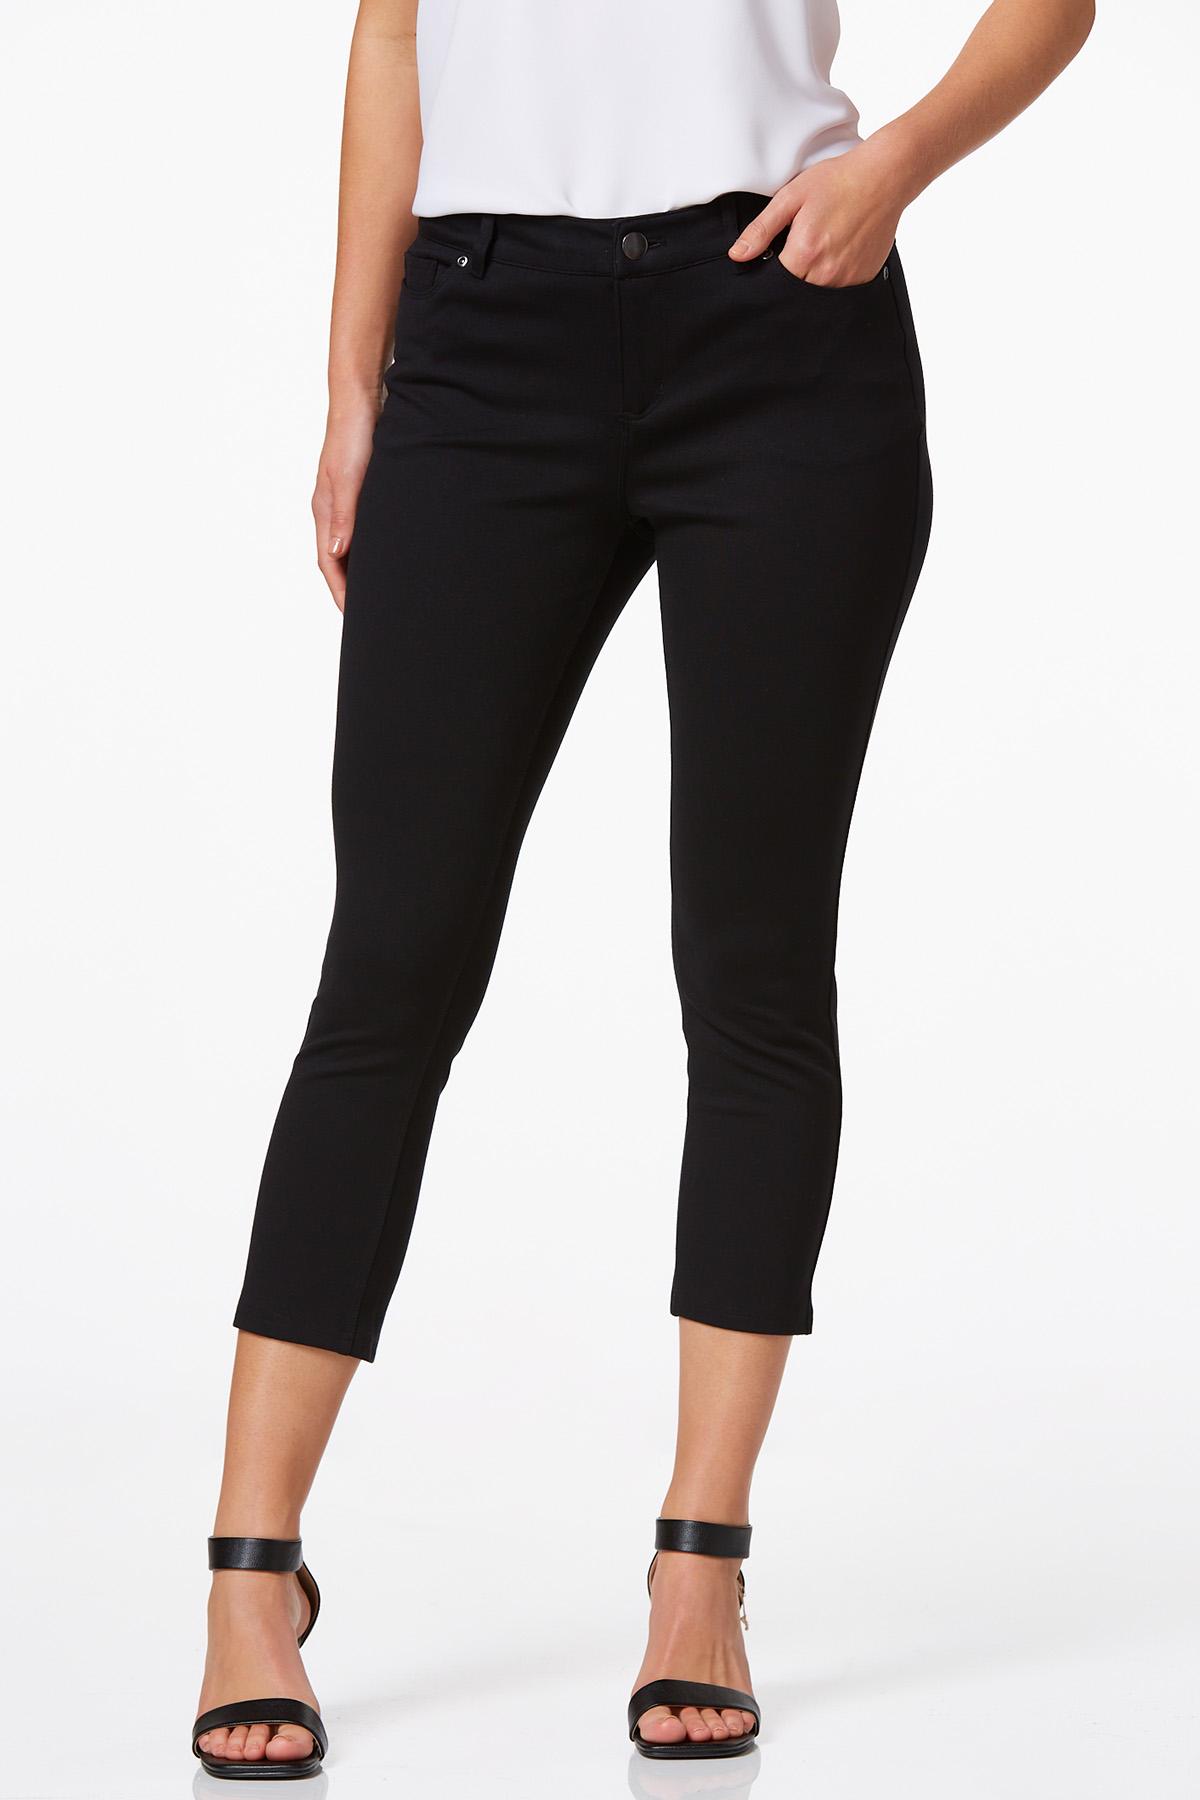 Cato Fashions  Cato Solid Ponte Skinny Pants